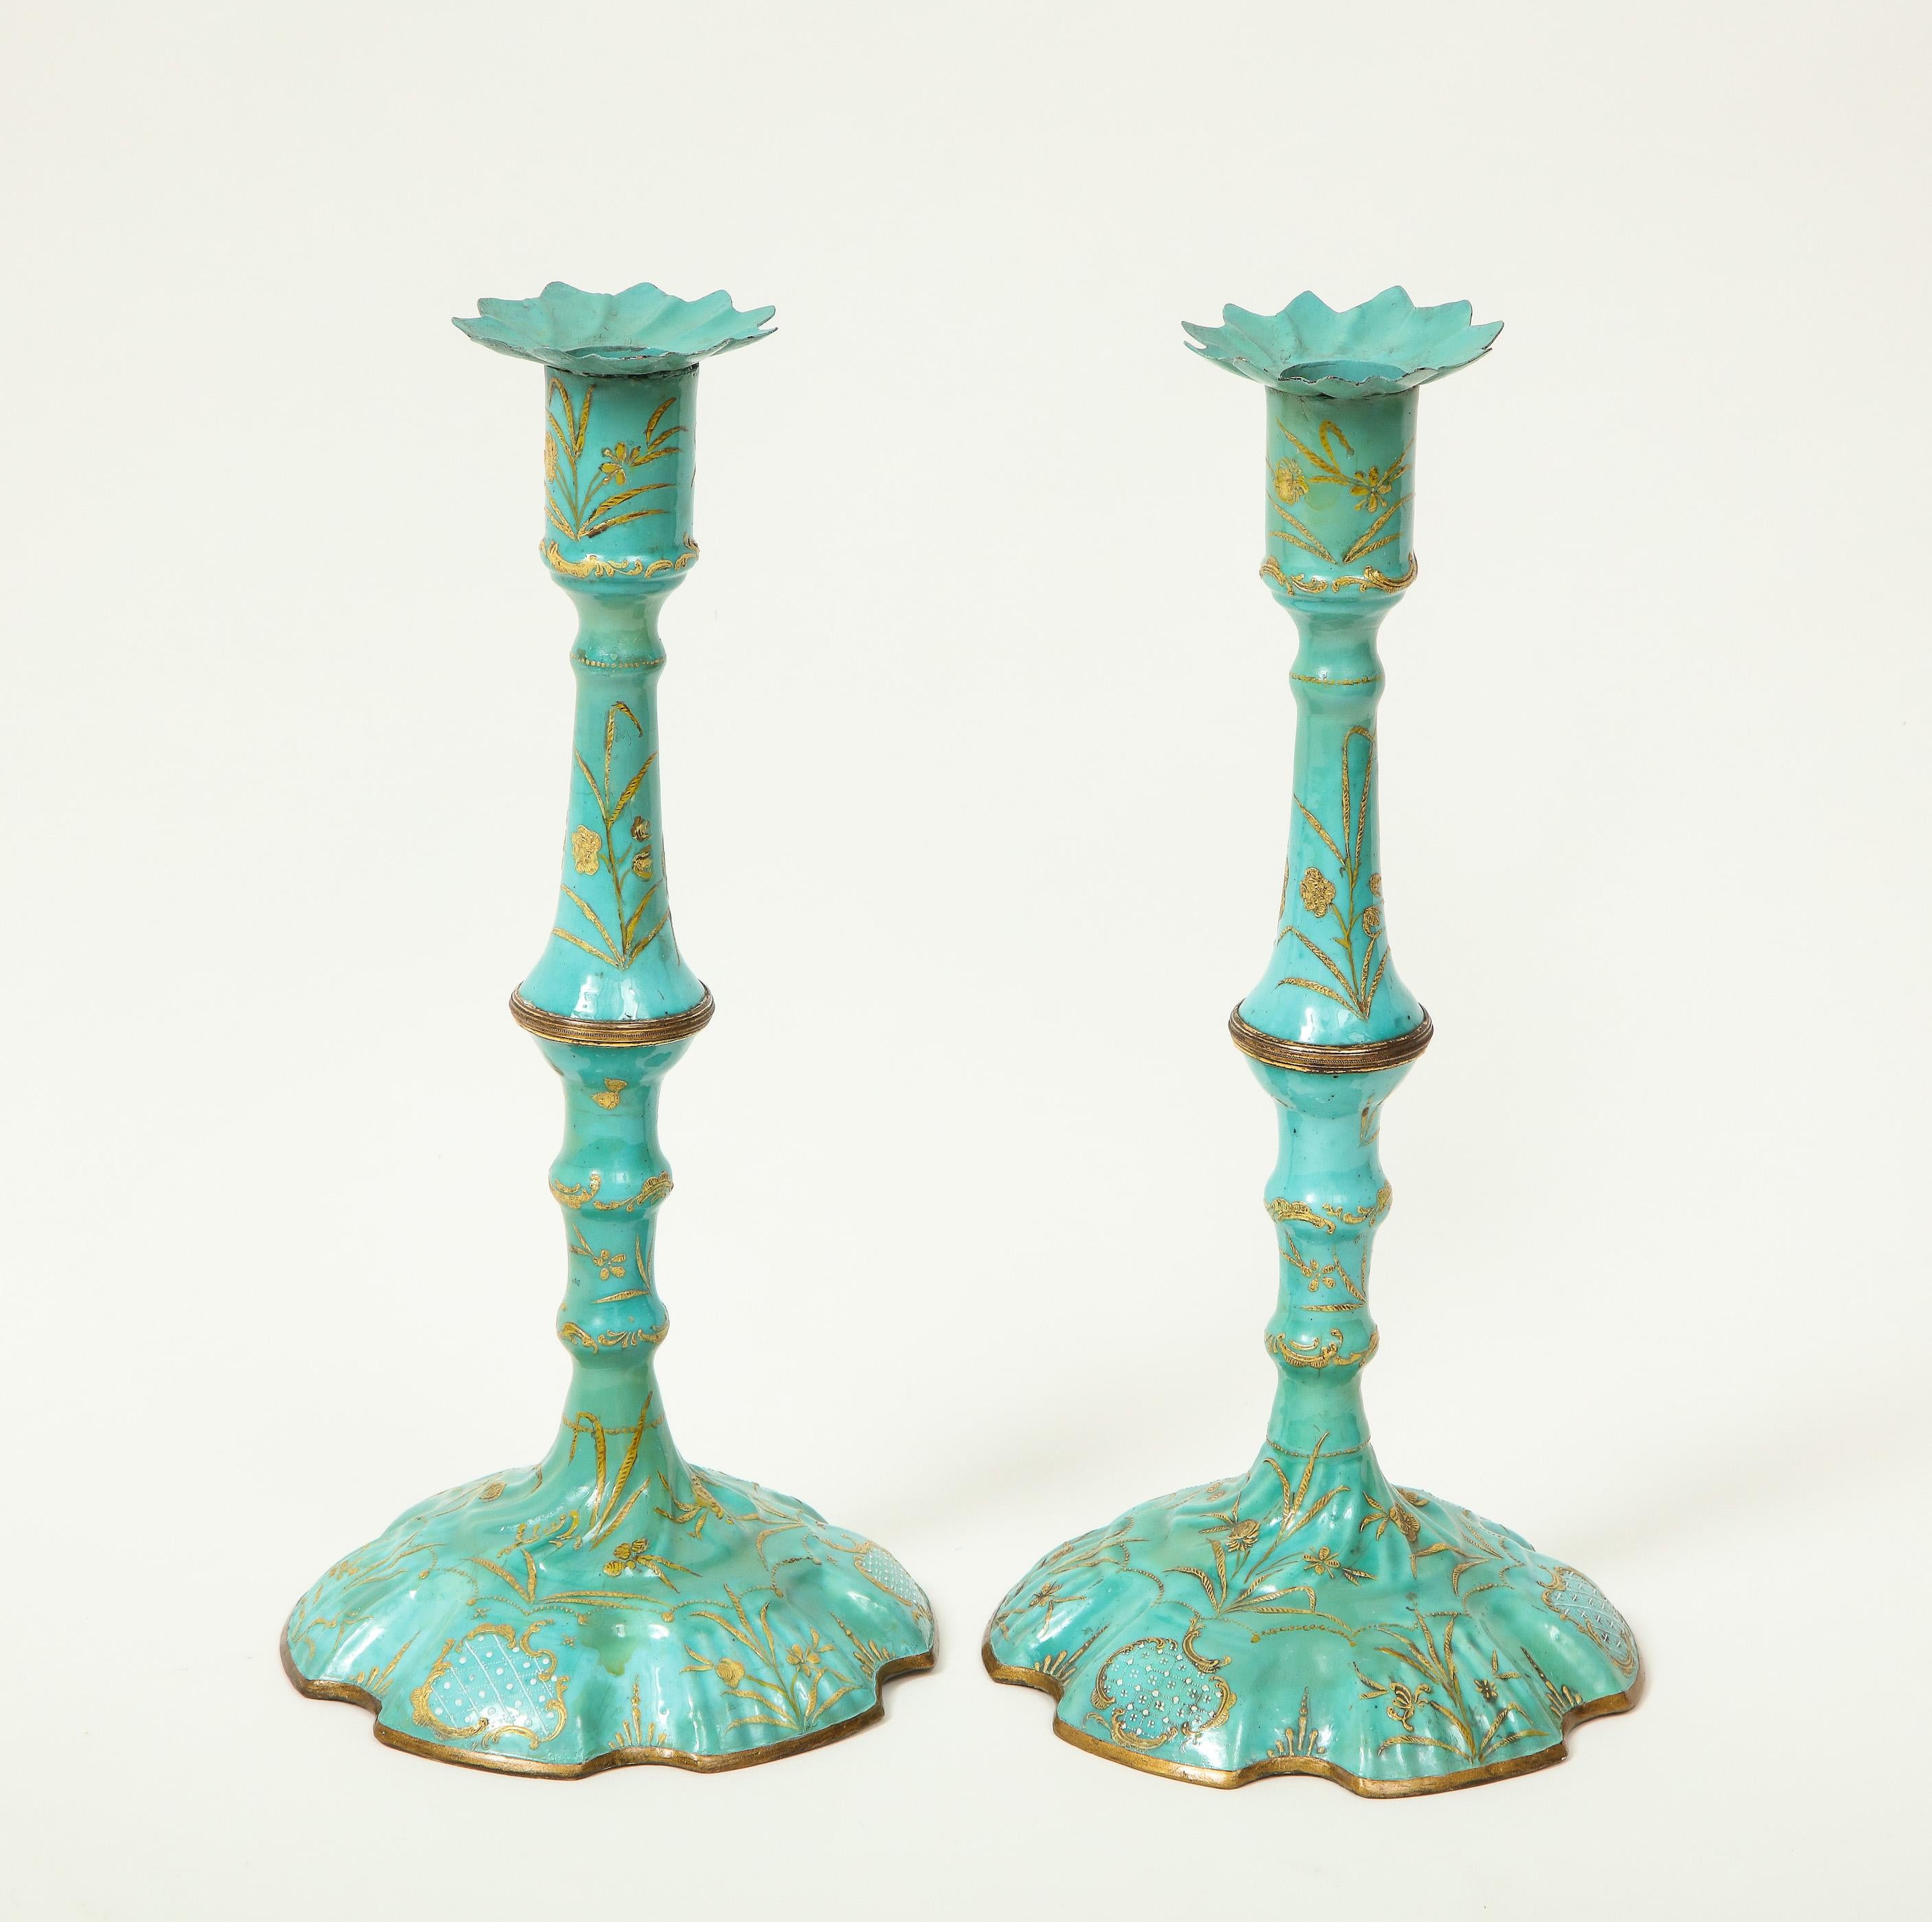 Hand-Painted Pair of Tall George III Turquoise and Gilt Battersea Enamel Candlesticks